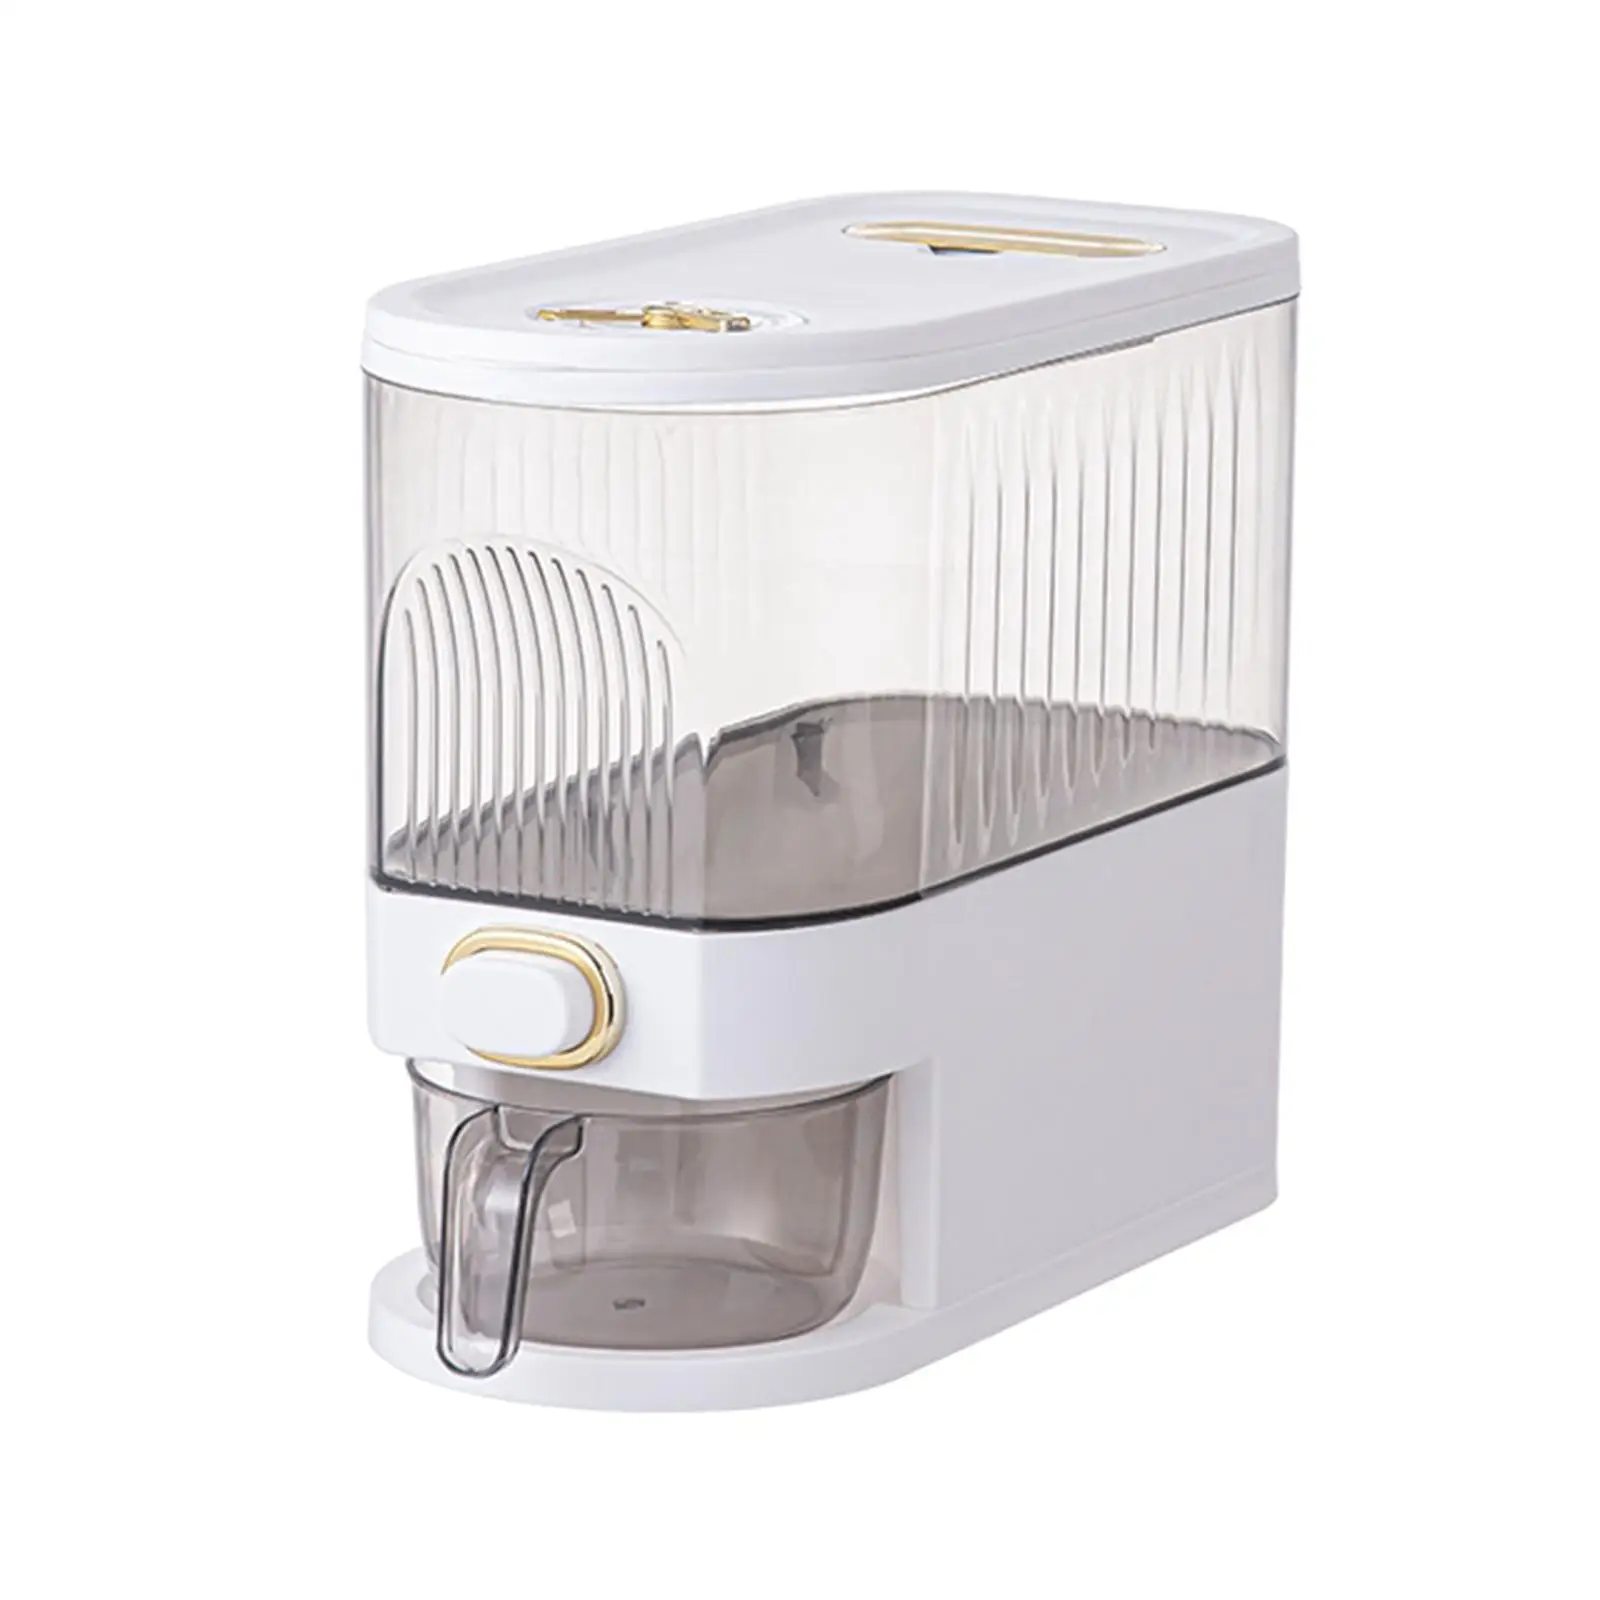 Rice Dispenser Sealed Rice Container, Rice Bucket, Food Storge Container for Grain, Rice, Flour ,Dry Food, Household